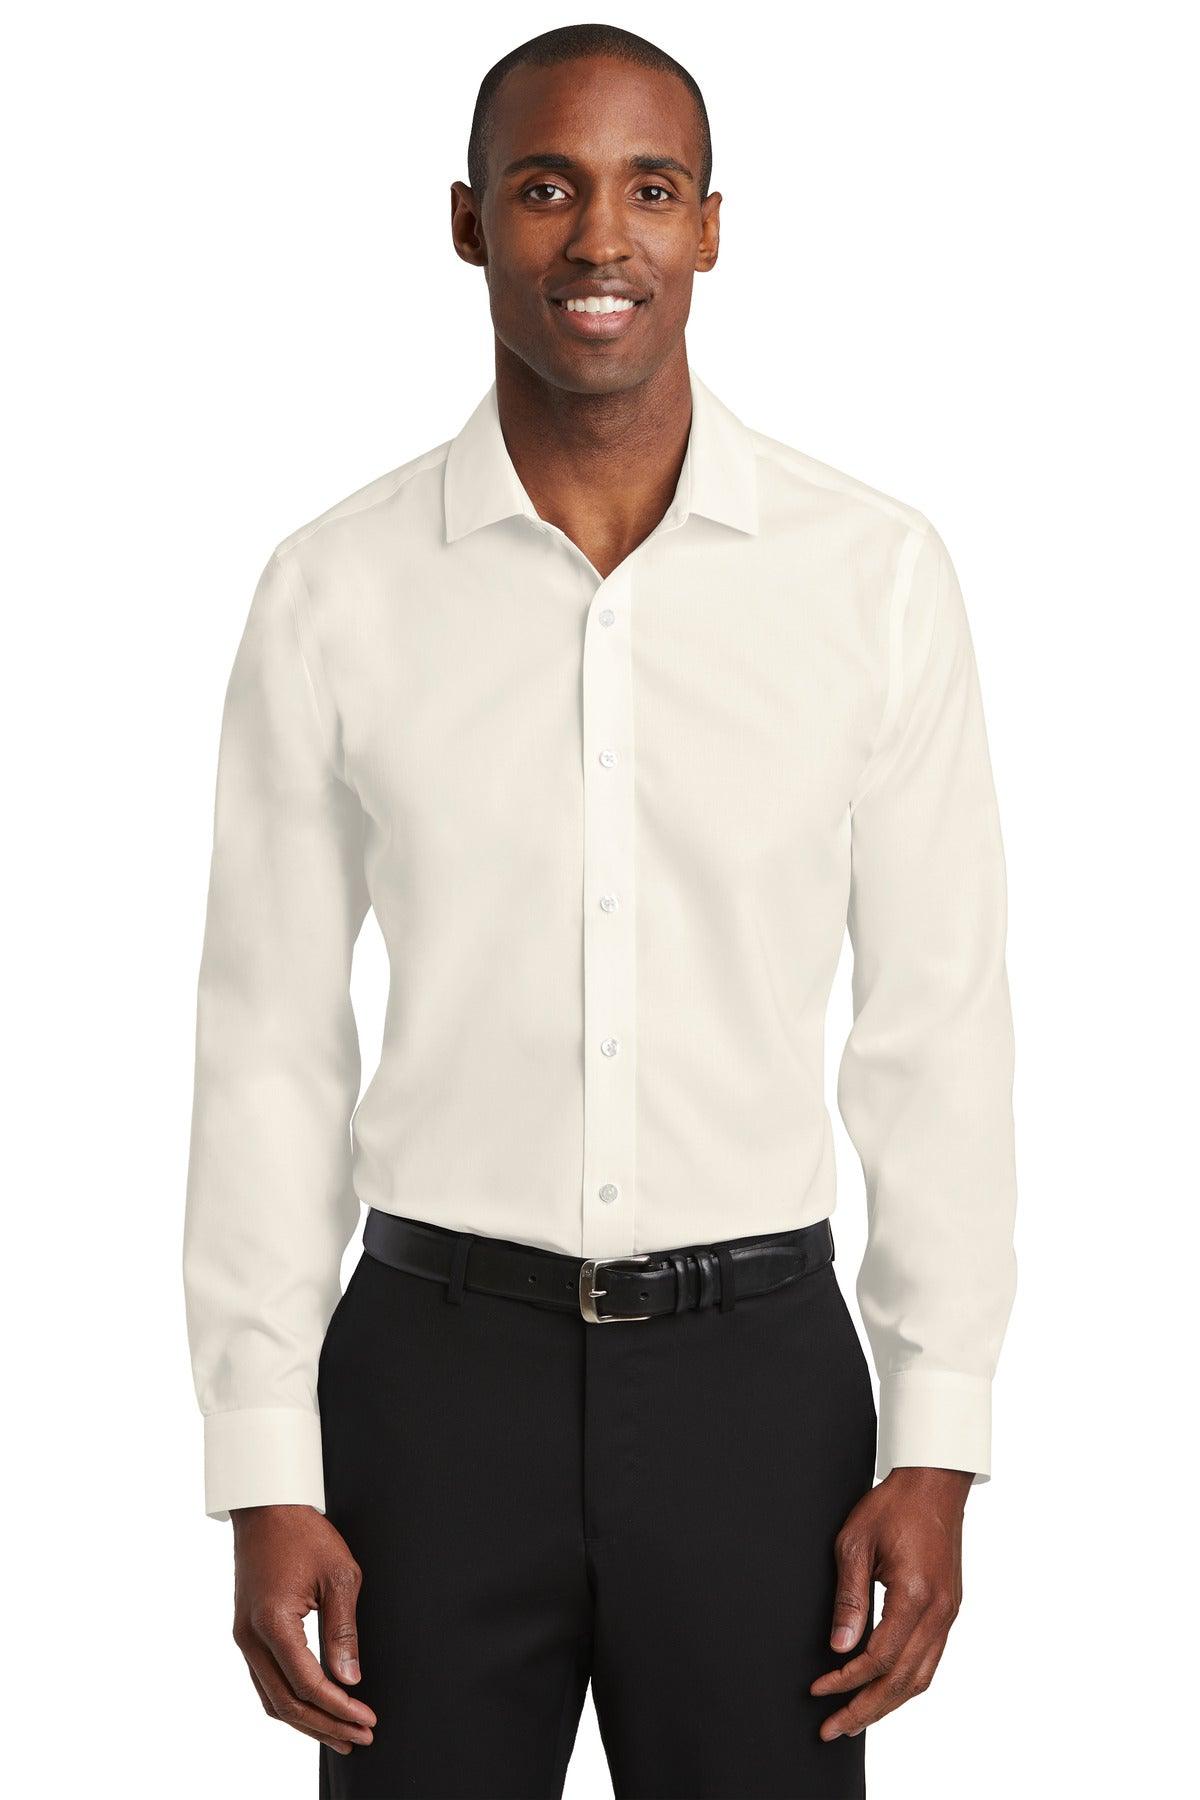 Red House Slim Fit Pinpoint Oxford Non-Iron Shirt. RH620 - Dresses Max